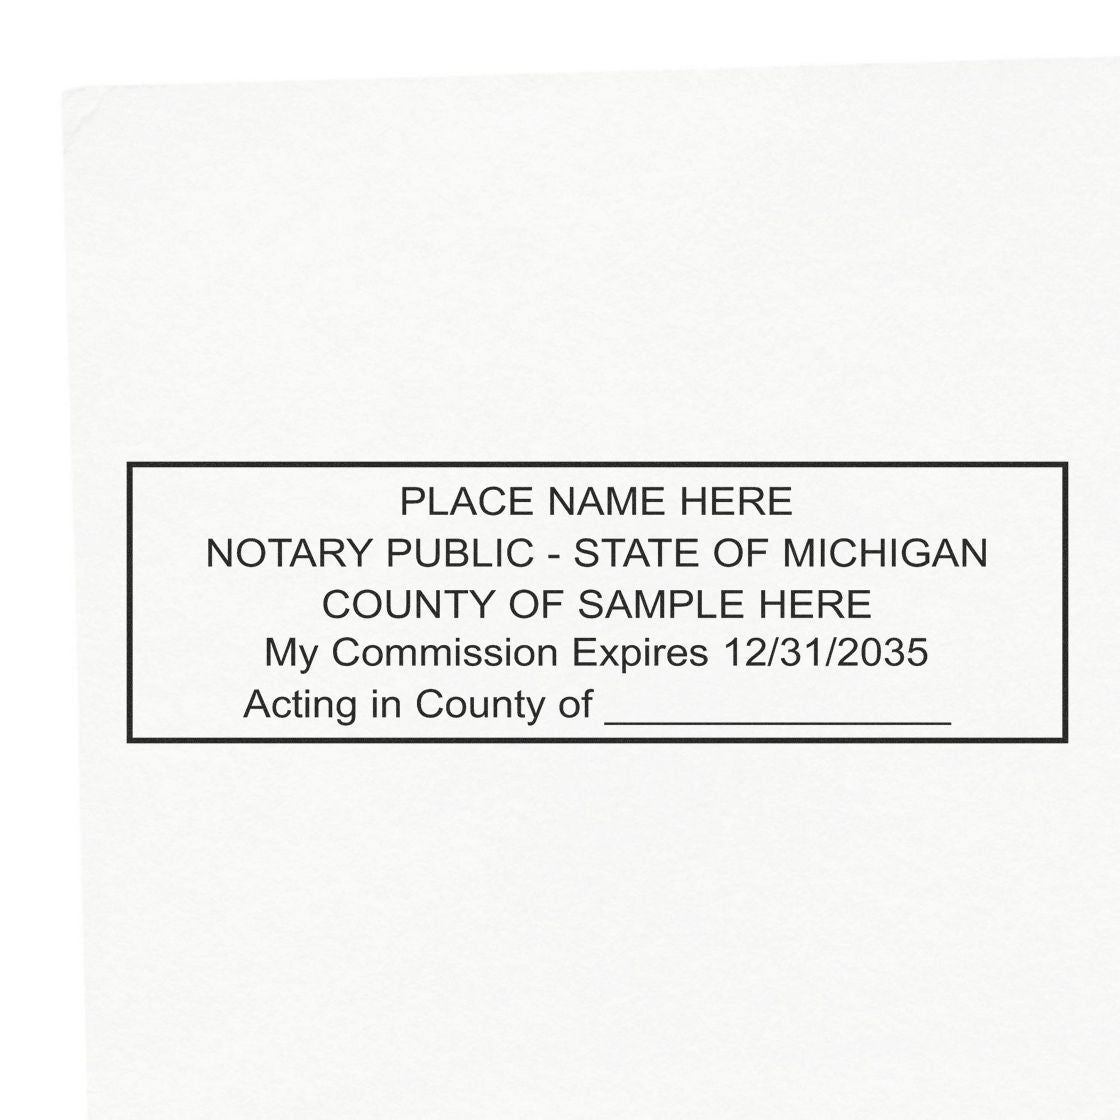 A lifestyle photo showing a stamped image of the MaxLight Premium Pre-Inked Michigan State Seal Notarial Stamp on a piece of paper